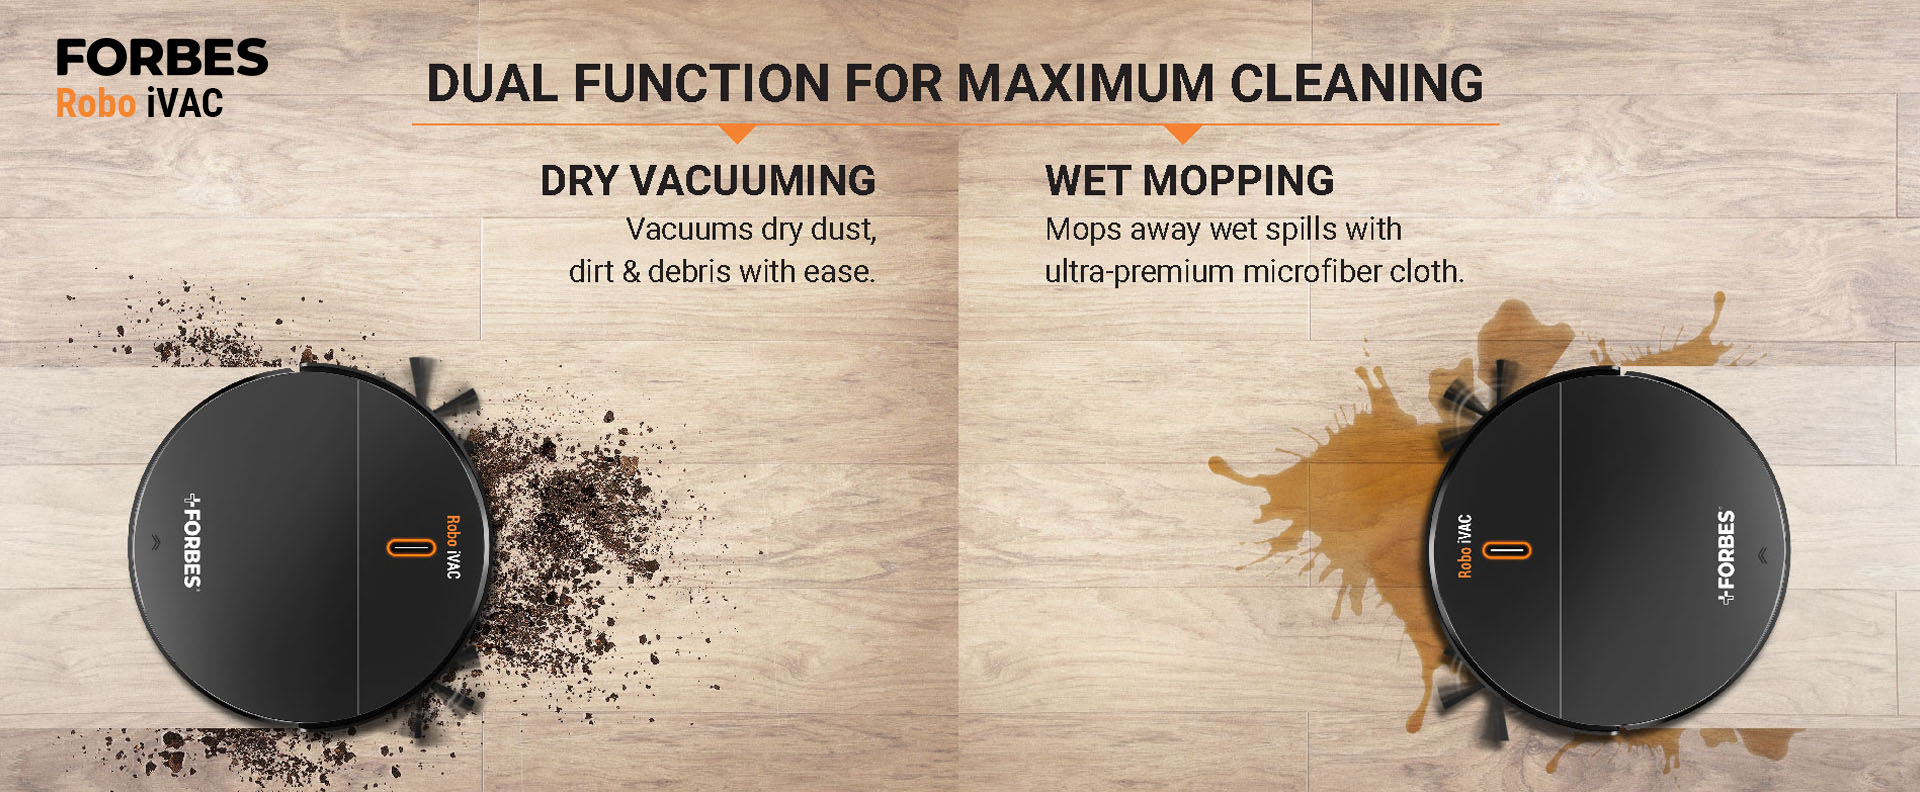 Dry vacuuming Vacuums dry dust, dirt & debris with ease. Wet Mopping Mops away wet spills with ultra-premium microfiber cloth.